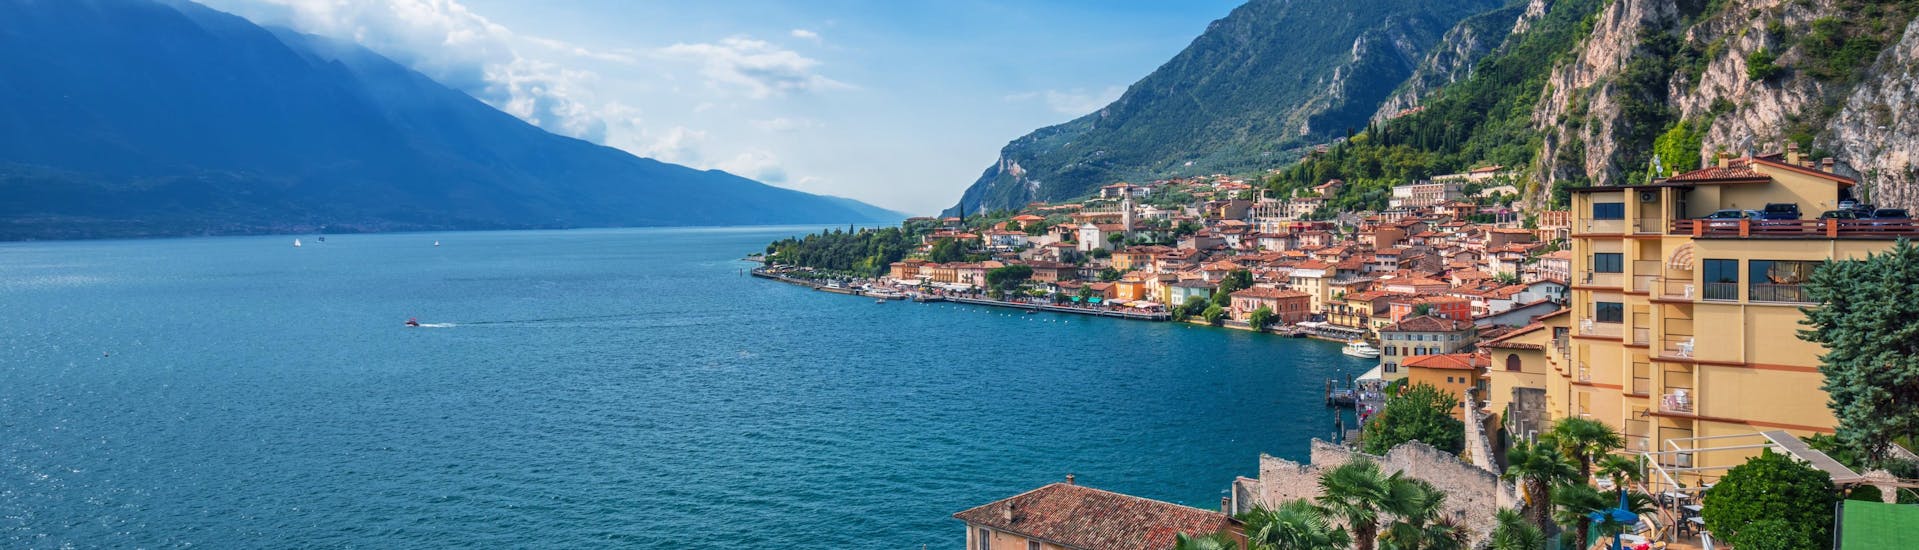 An image of the beautiful Lake Garda in Northern Italy, the perfect spot to book a boat trip in summer.